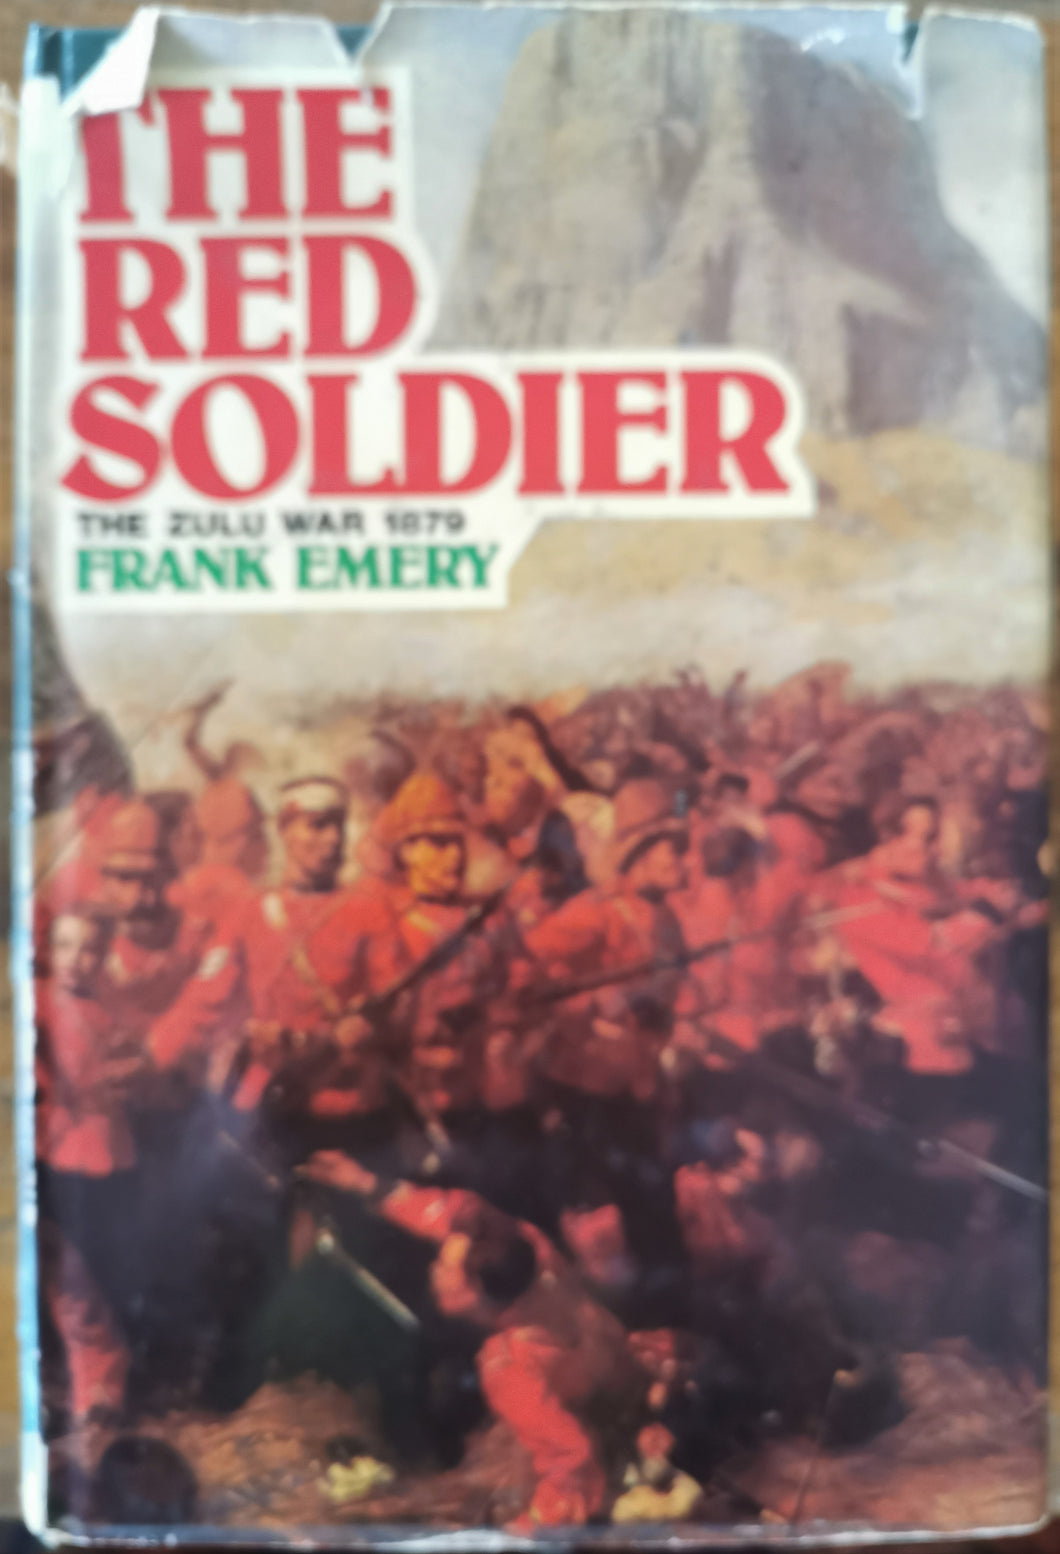 The Red Soldier: The Zulu War 1879 - Frank Emery